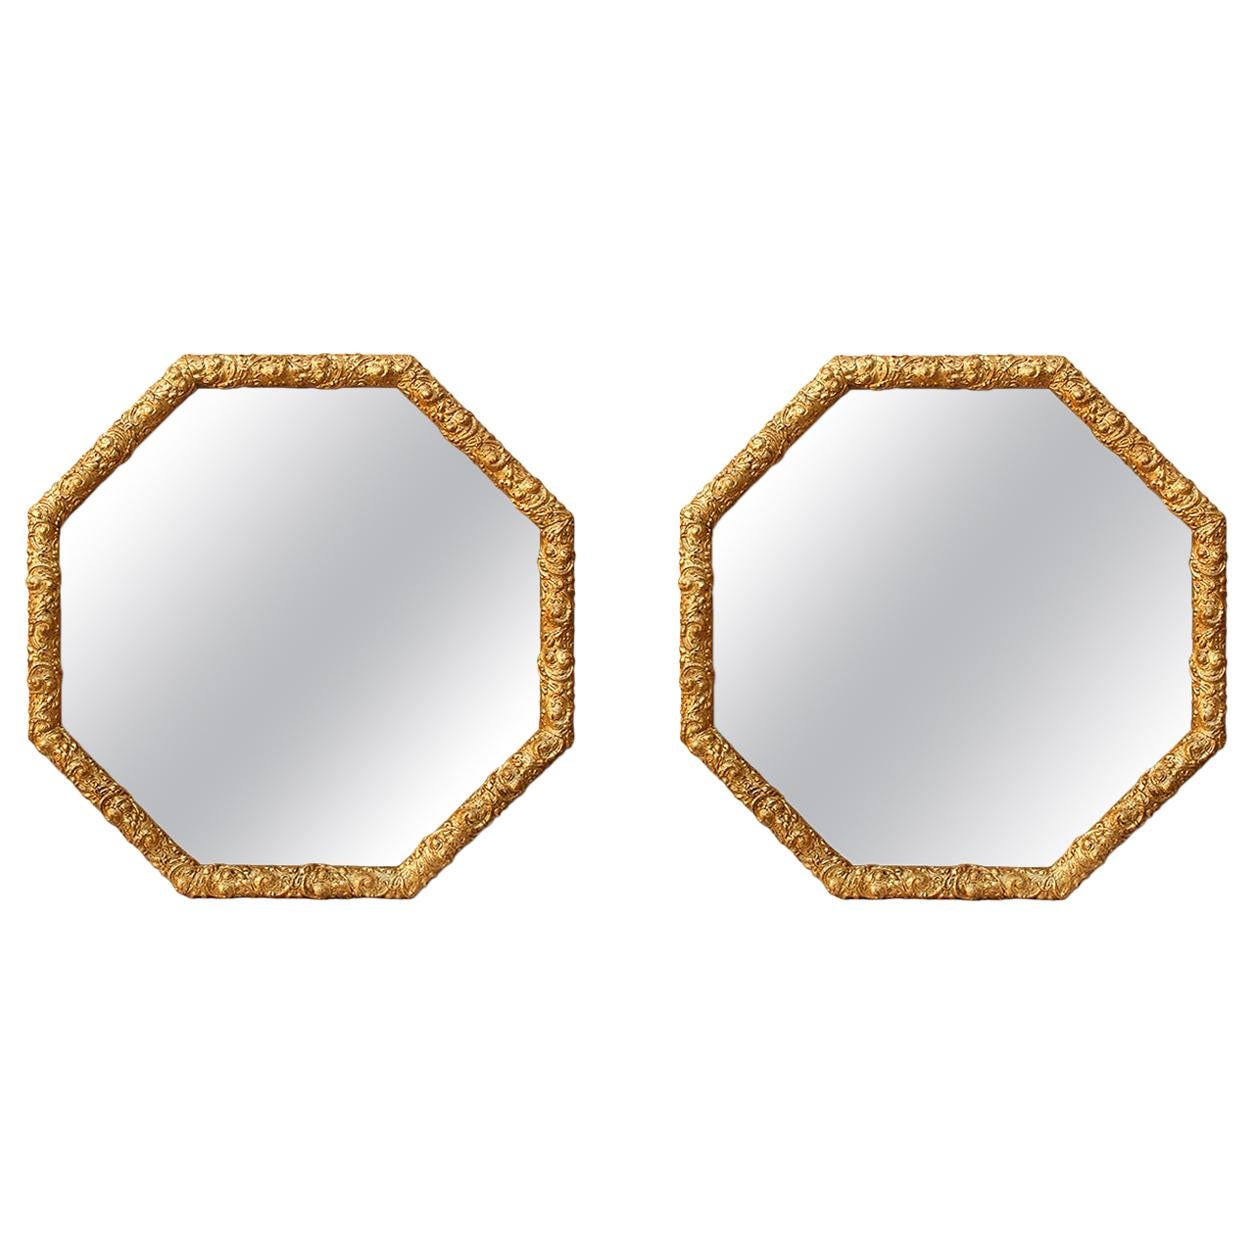 Pair of Octagonal Giltwood Mirrors, circa 1900 For Sale